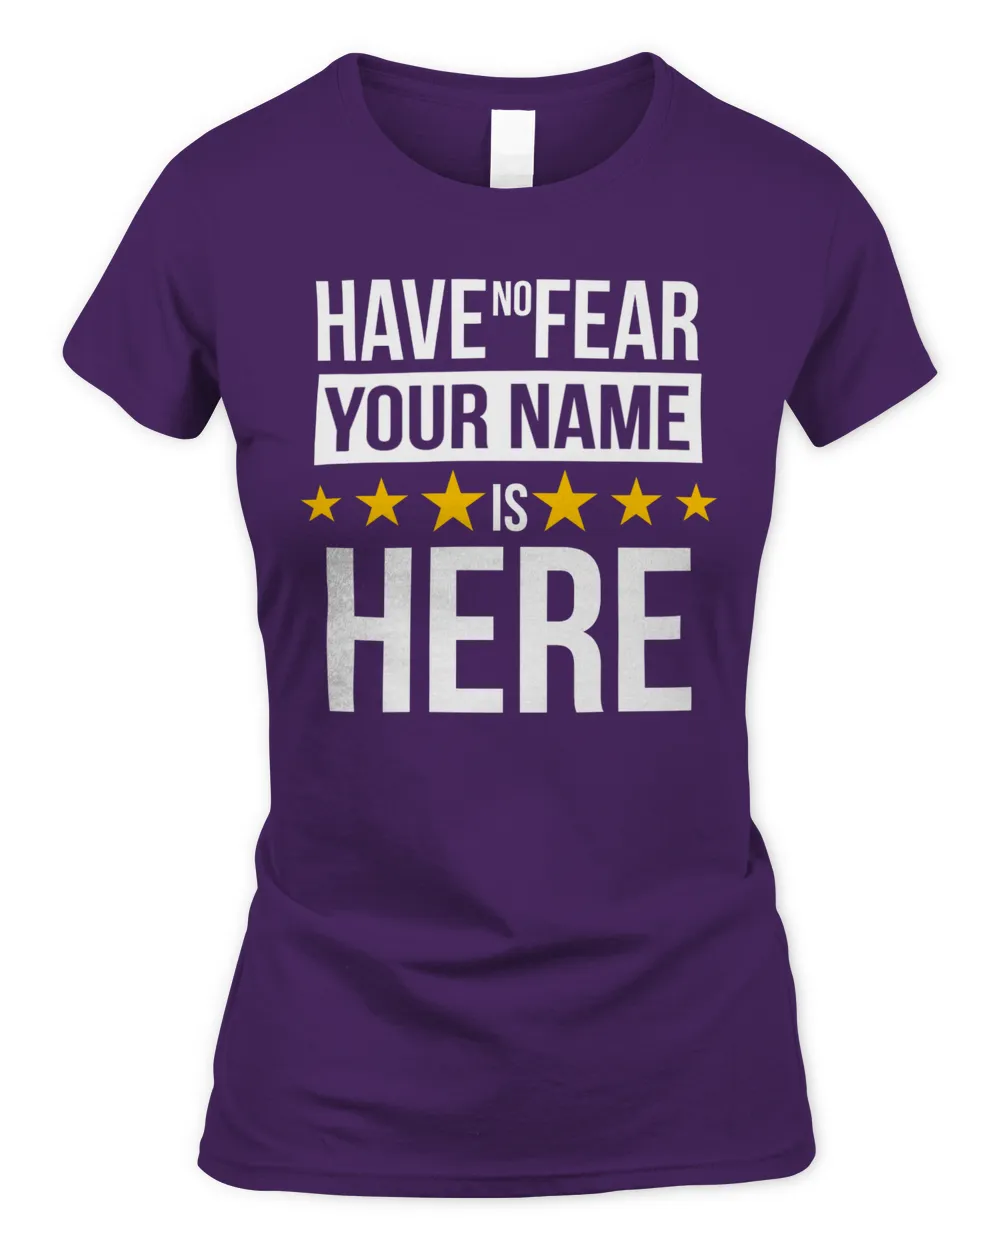 Have no Fear ! YOUR NAME is HERE